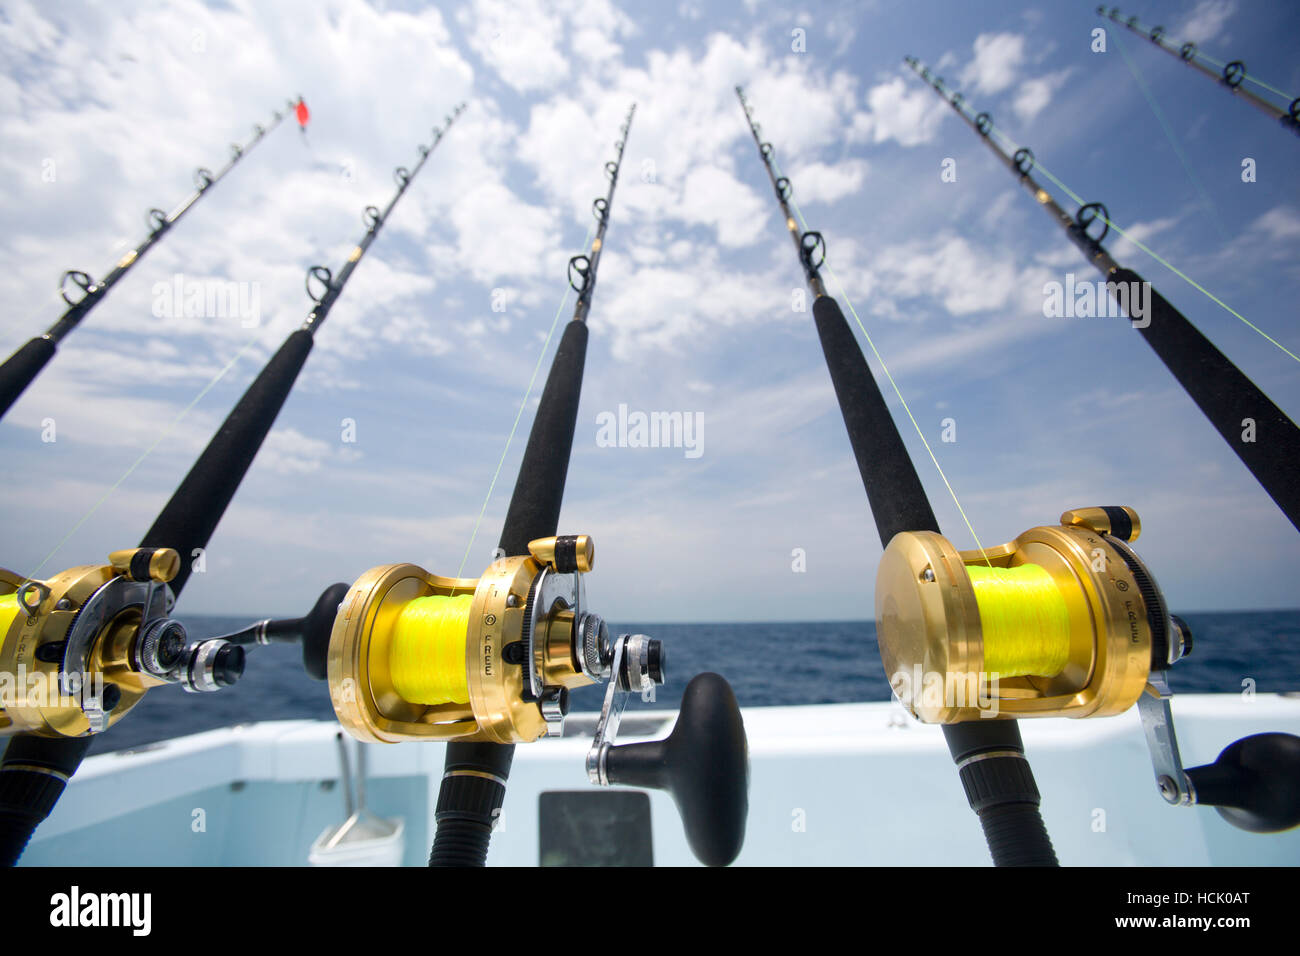 https://c8.alamy.com/comp/HCK0AT/a-wide-angle-shot-of-deep-sea-fishing-rods-ready-for-action-with-blue-HCK0AT.jpg